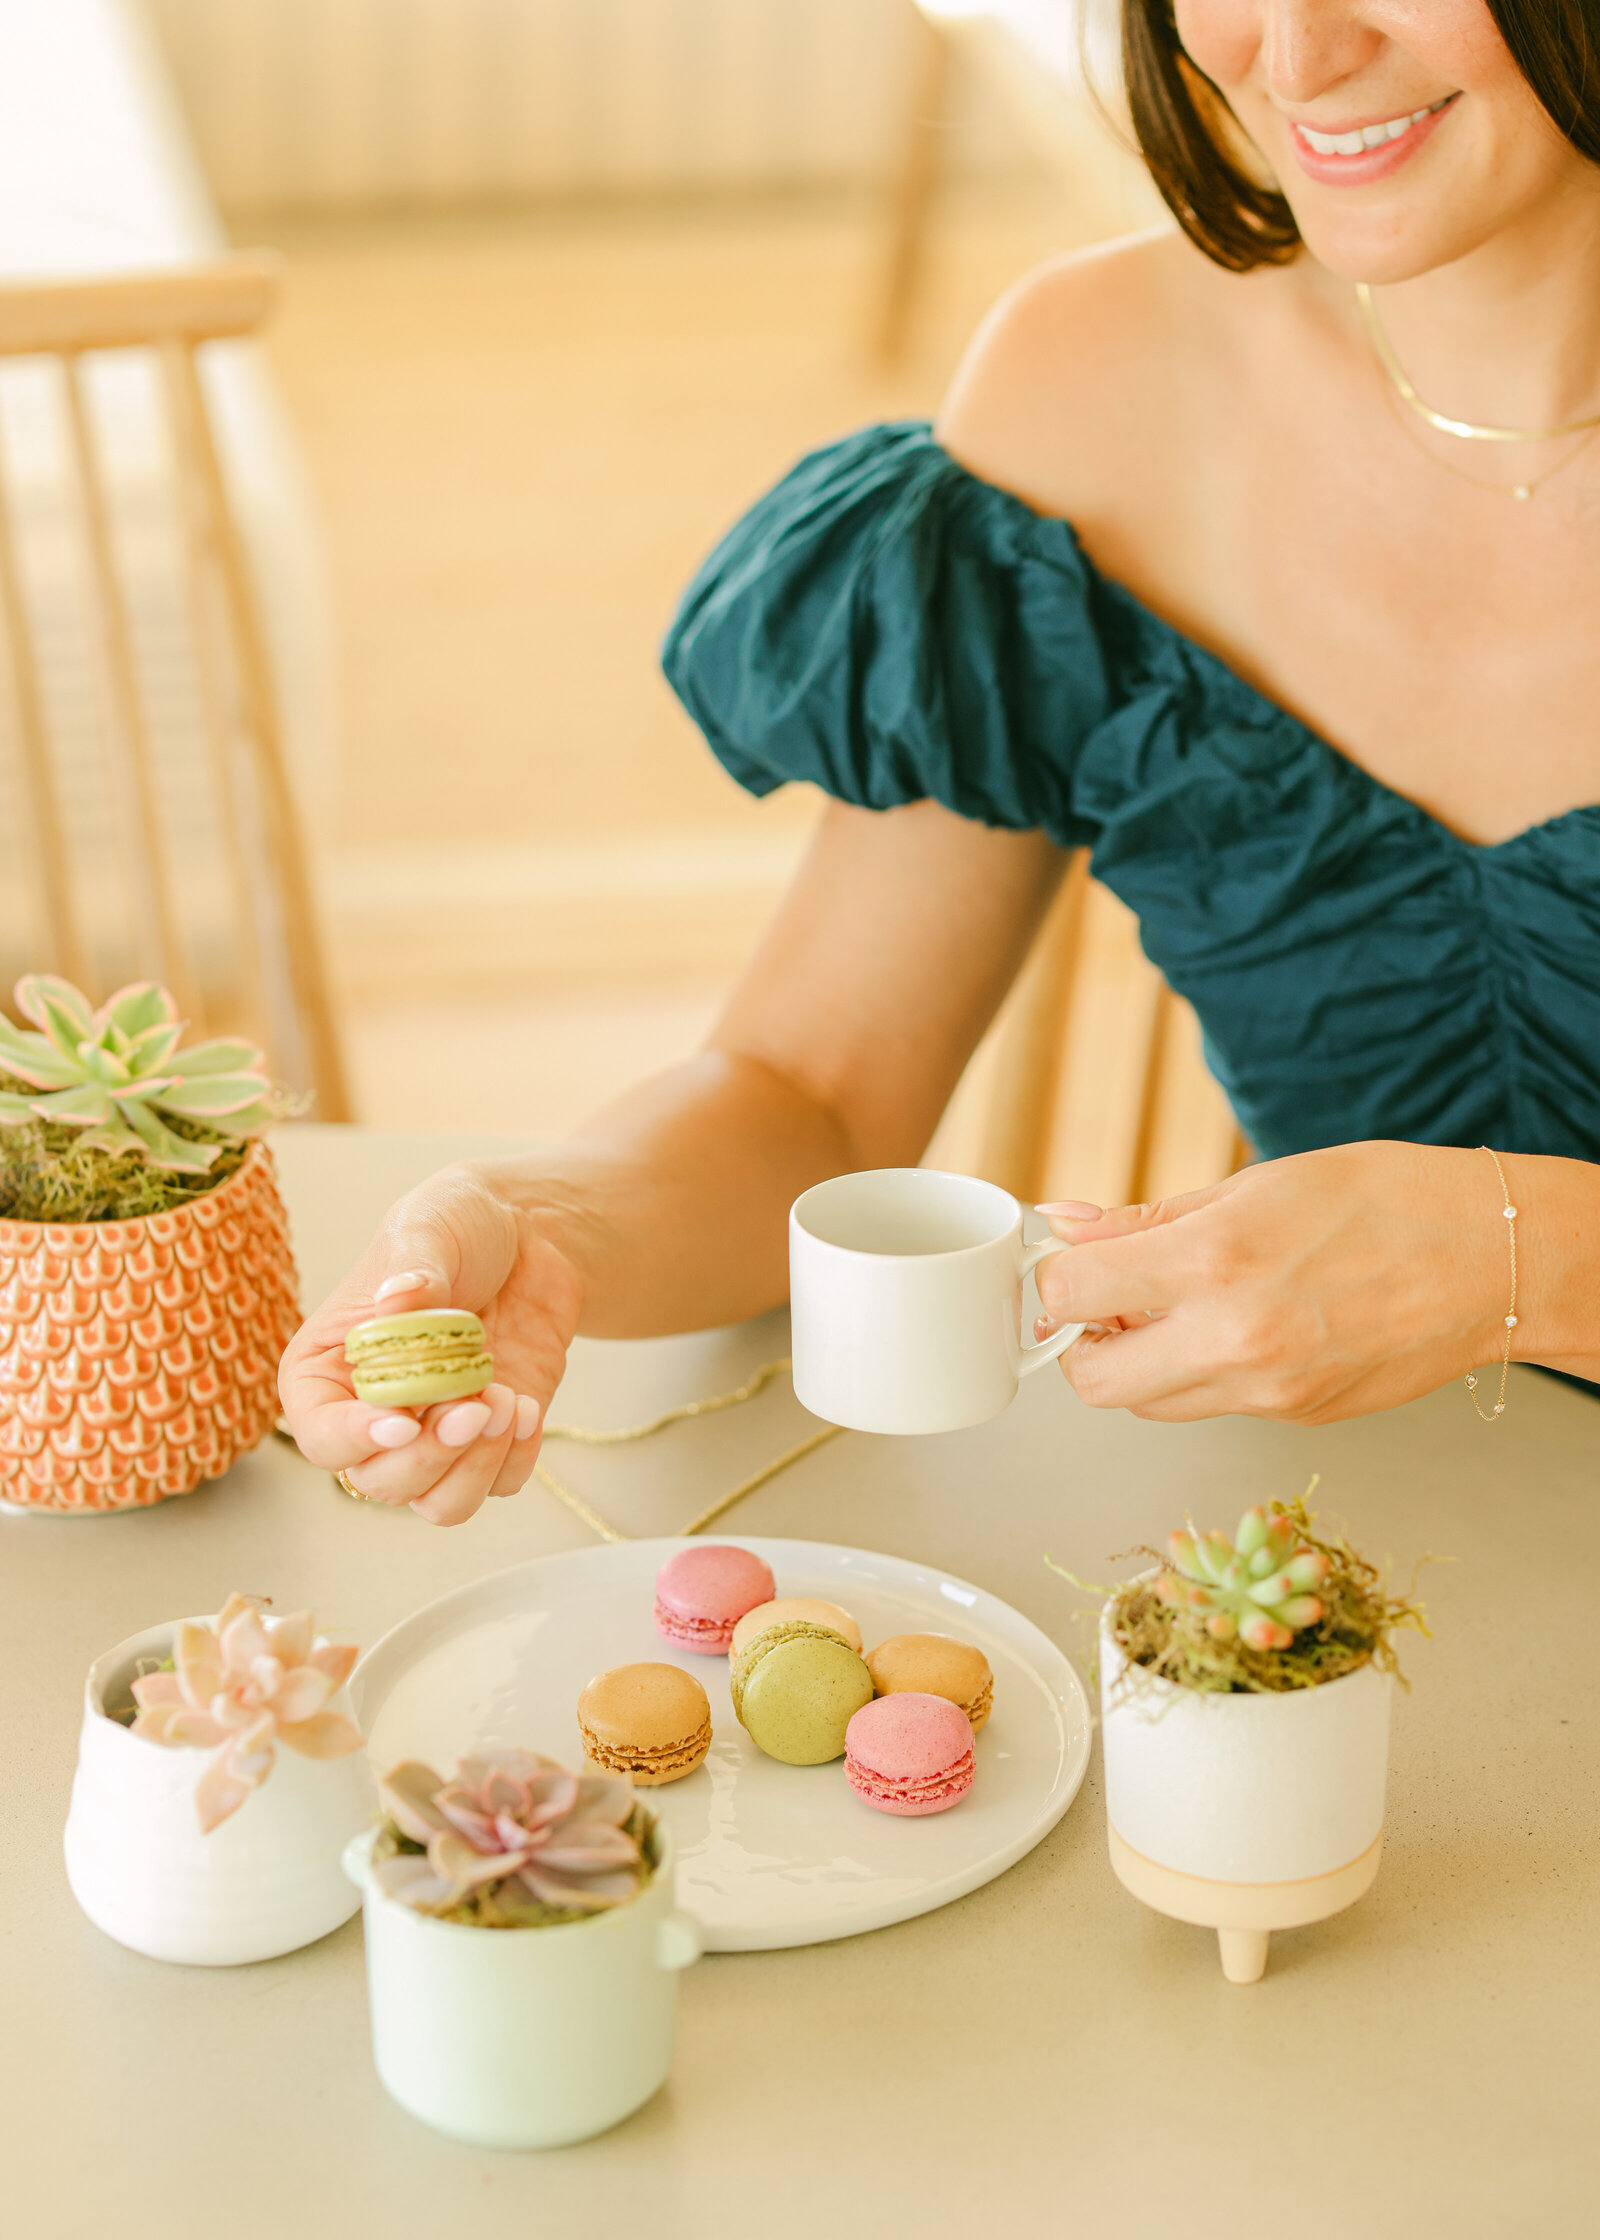 fashionable girl eating macarons at a table surrounded by succulents